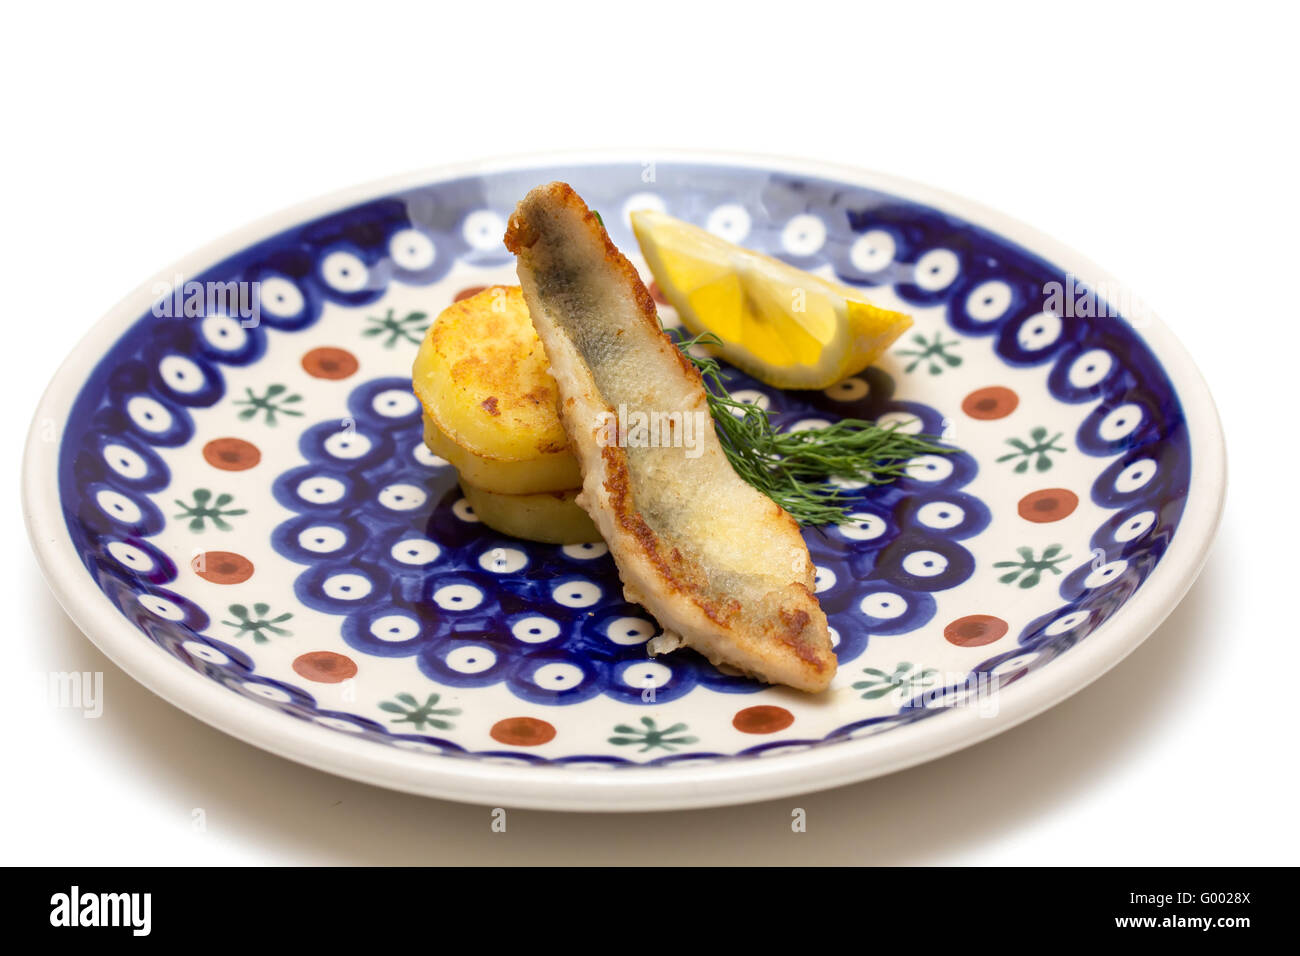 Perch filet with fried potatoes Stock Photo